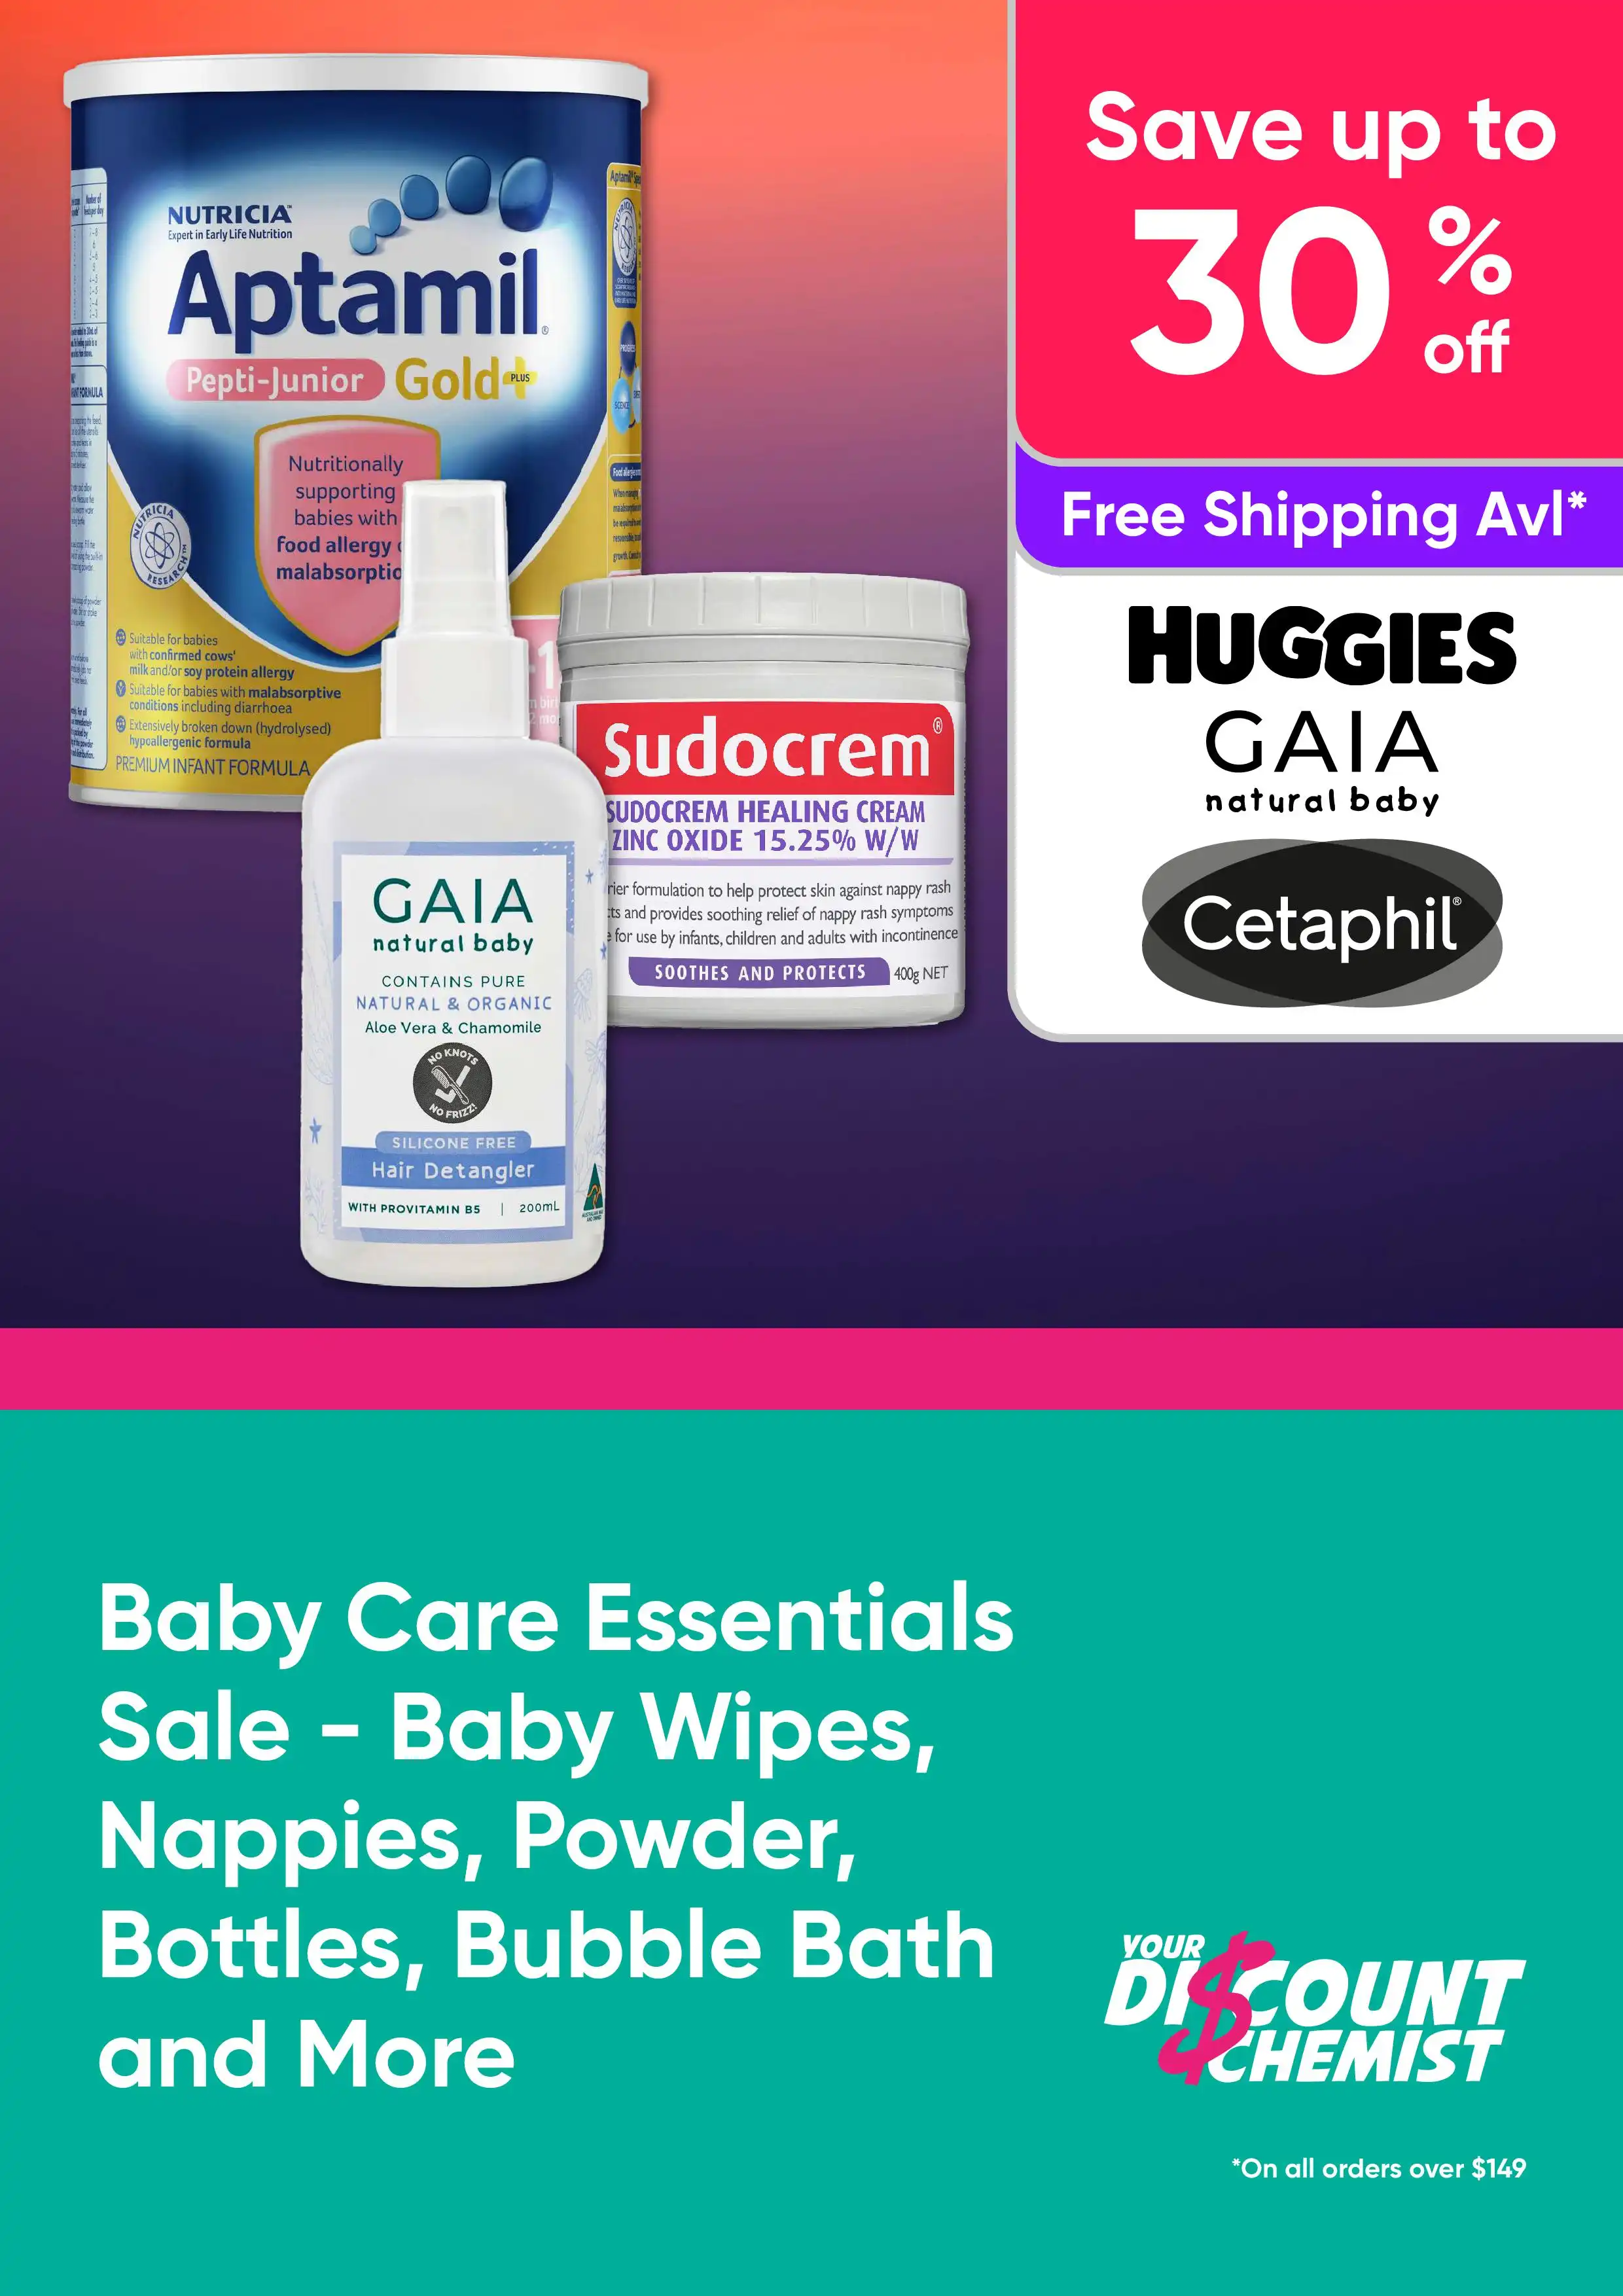 Baby Care Essentials Sale Save Up to 30% Off - Baby Wipes, Nappies, Powder, Bottles and More